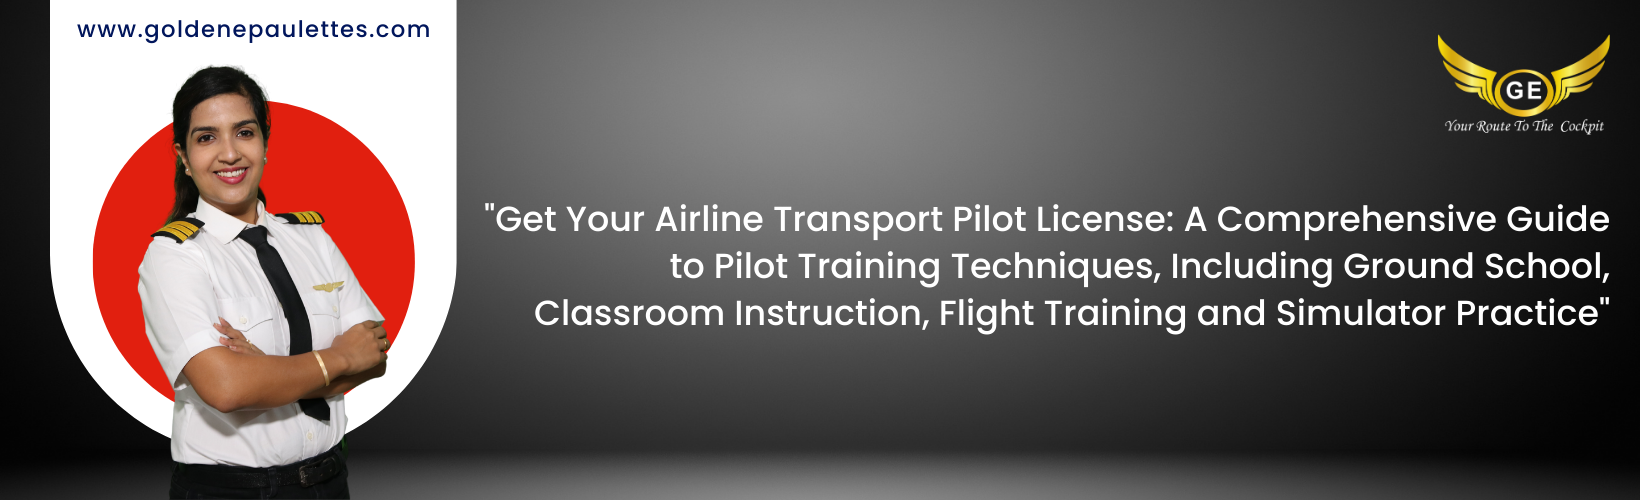 Airline Transport Pilot License and Crew Resource Management